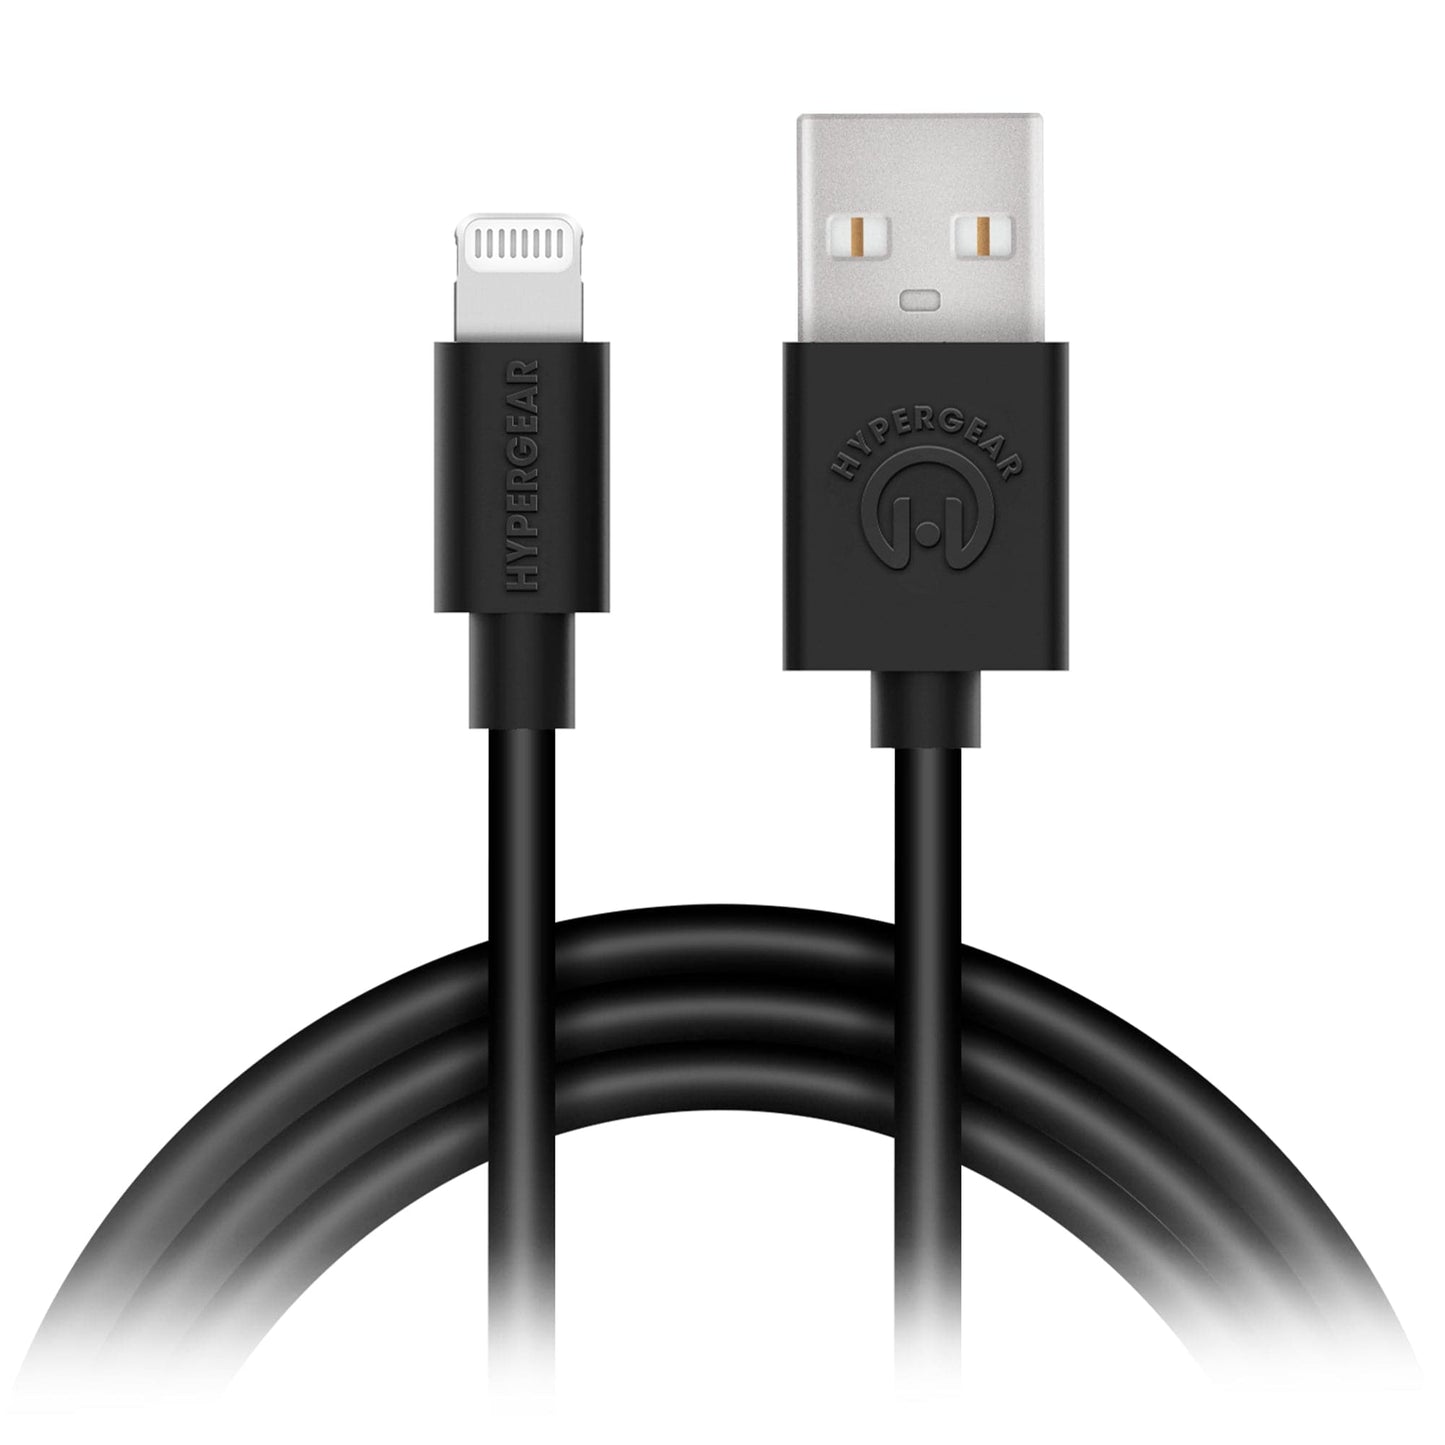 Hypergear / Naztech USB to Lightning Rounded Cable - Size & Color Options